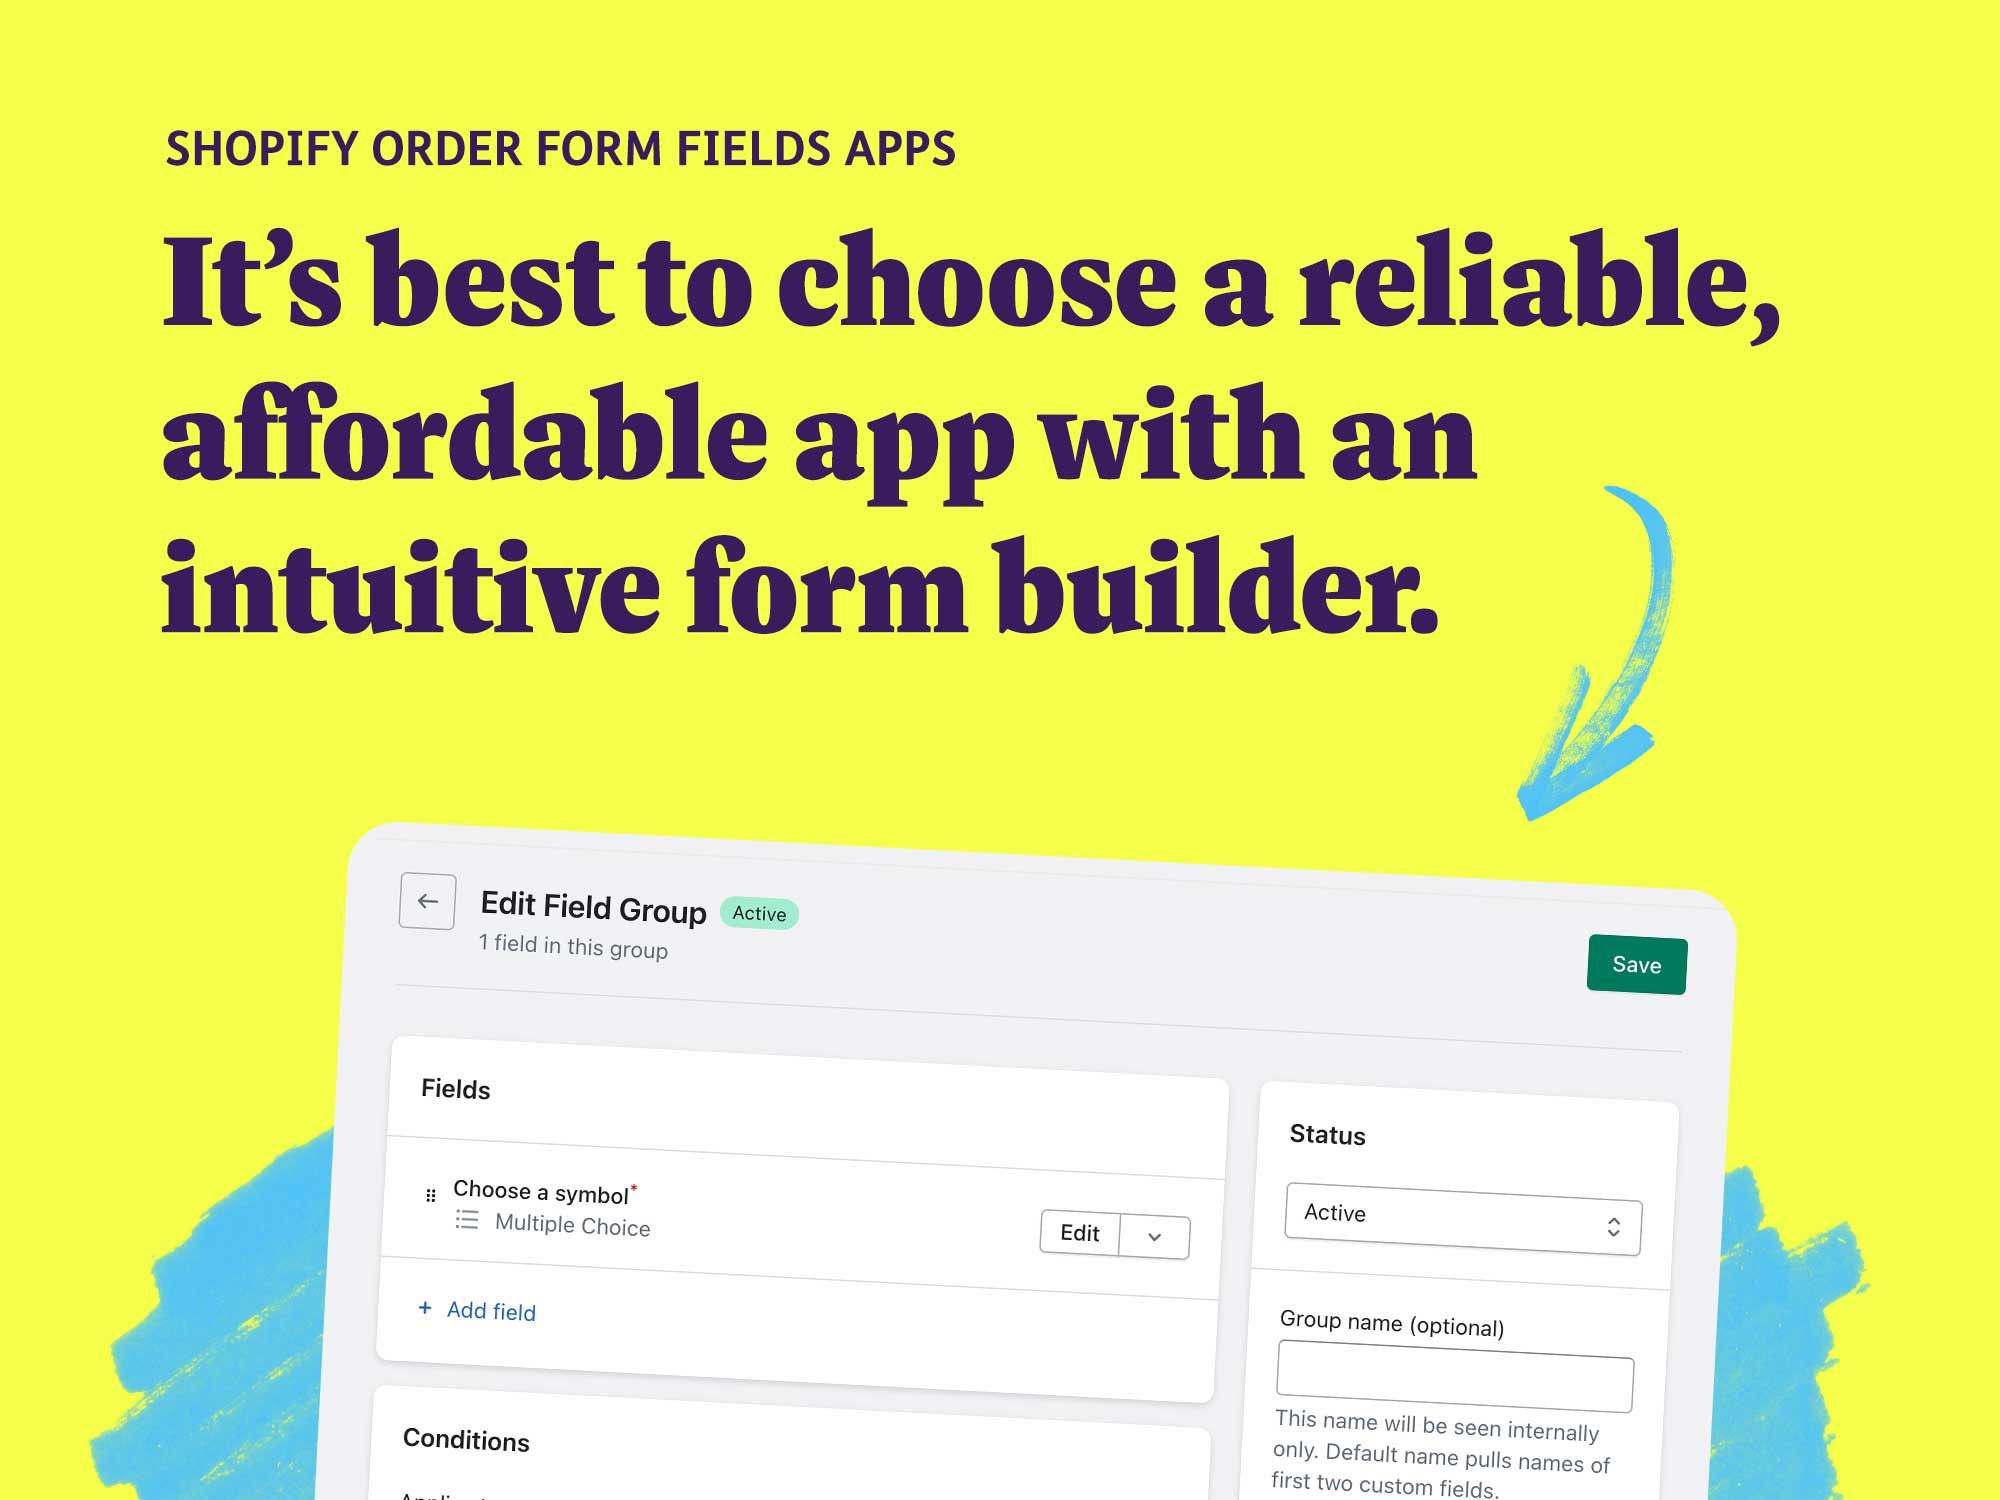 Shopify order form fields apps: It’s best to choose a reliable, affordable app with an intuitive form builder.